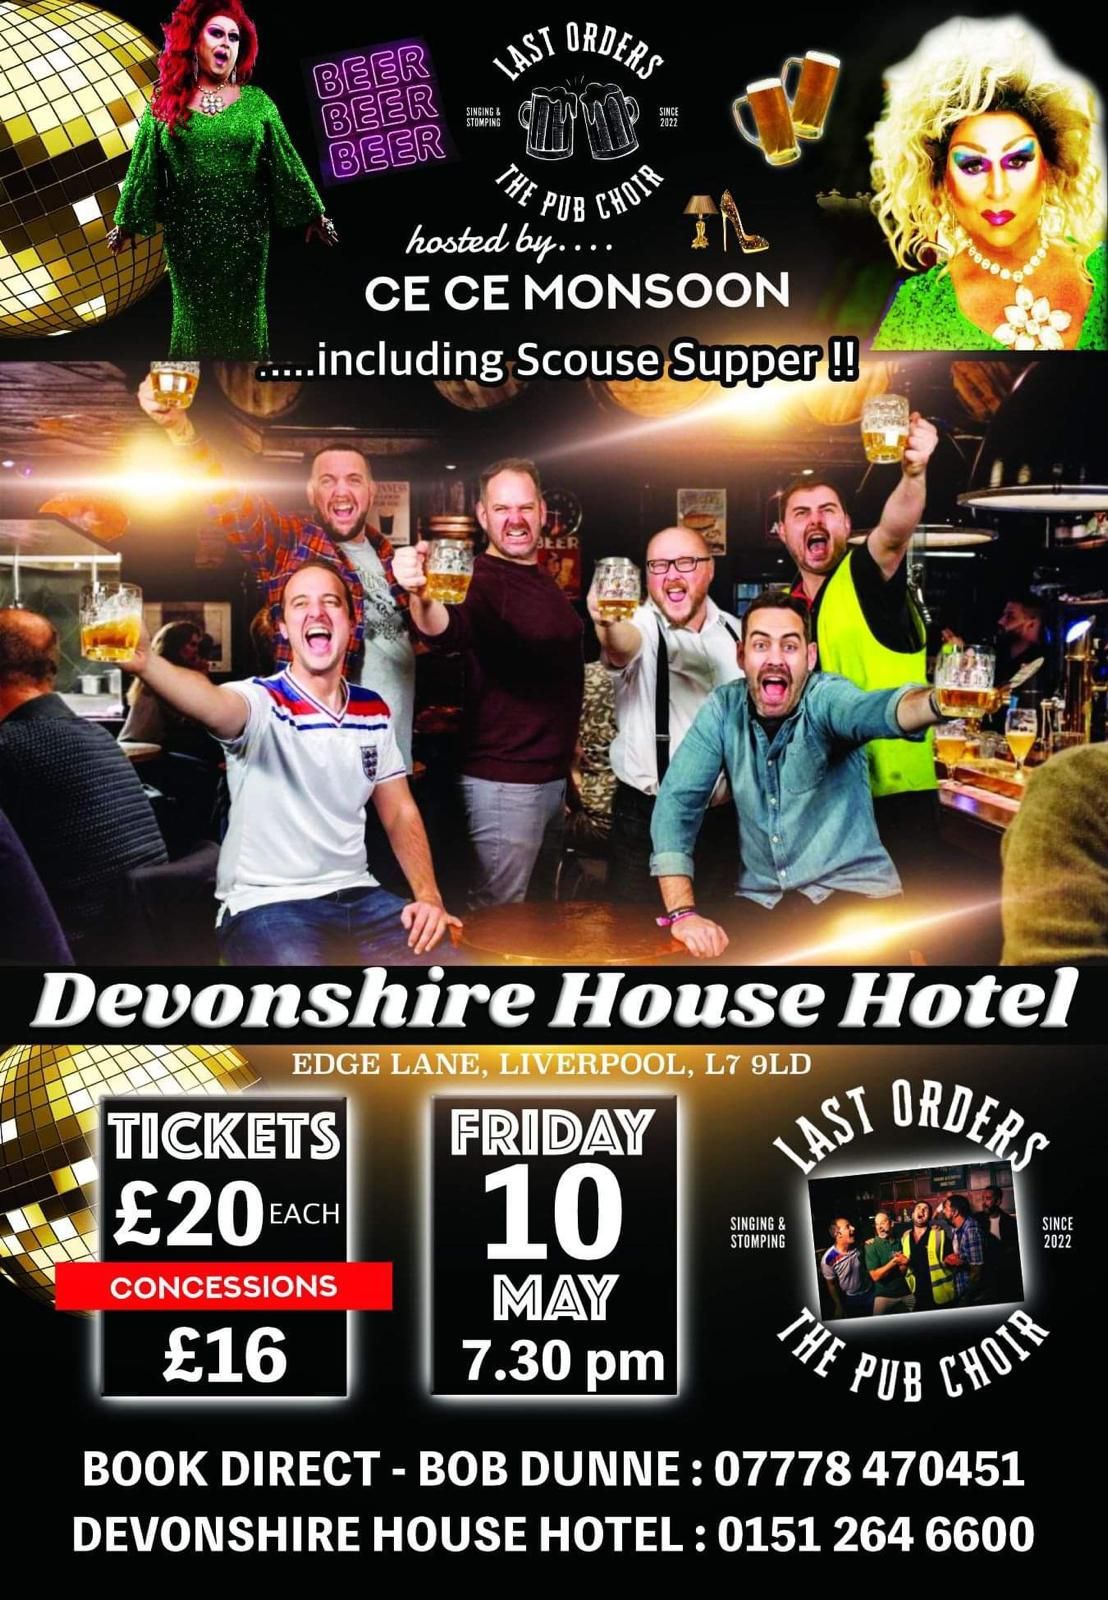 Last Orders The Pub Choir hosted by Ce Ce Monsoon